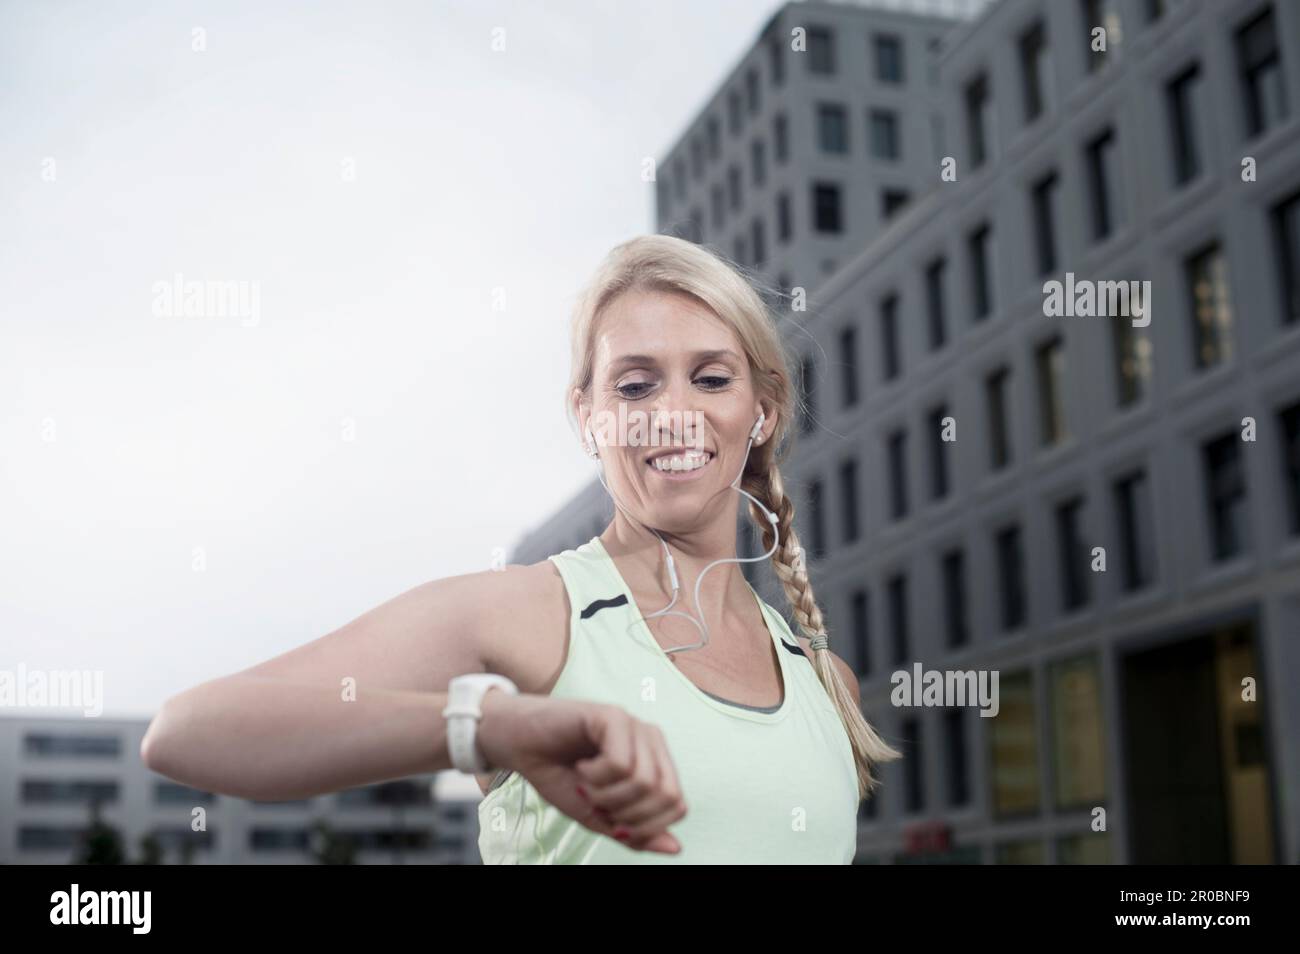 Mid adult woman checking the time after exercising and listening to music, Bavaria, Germany Stock Photo